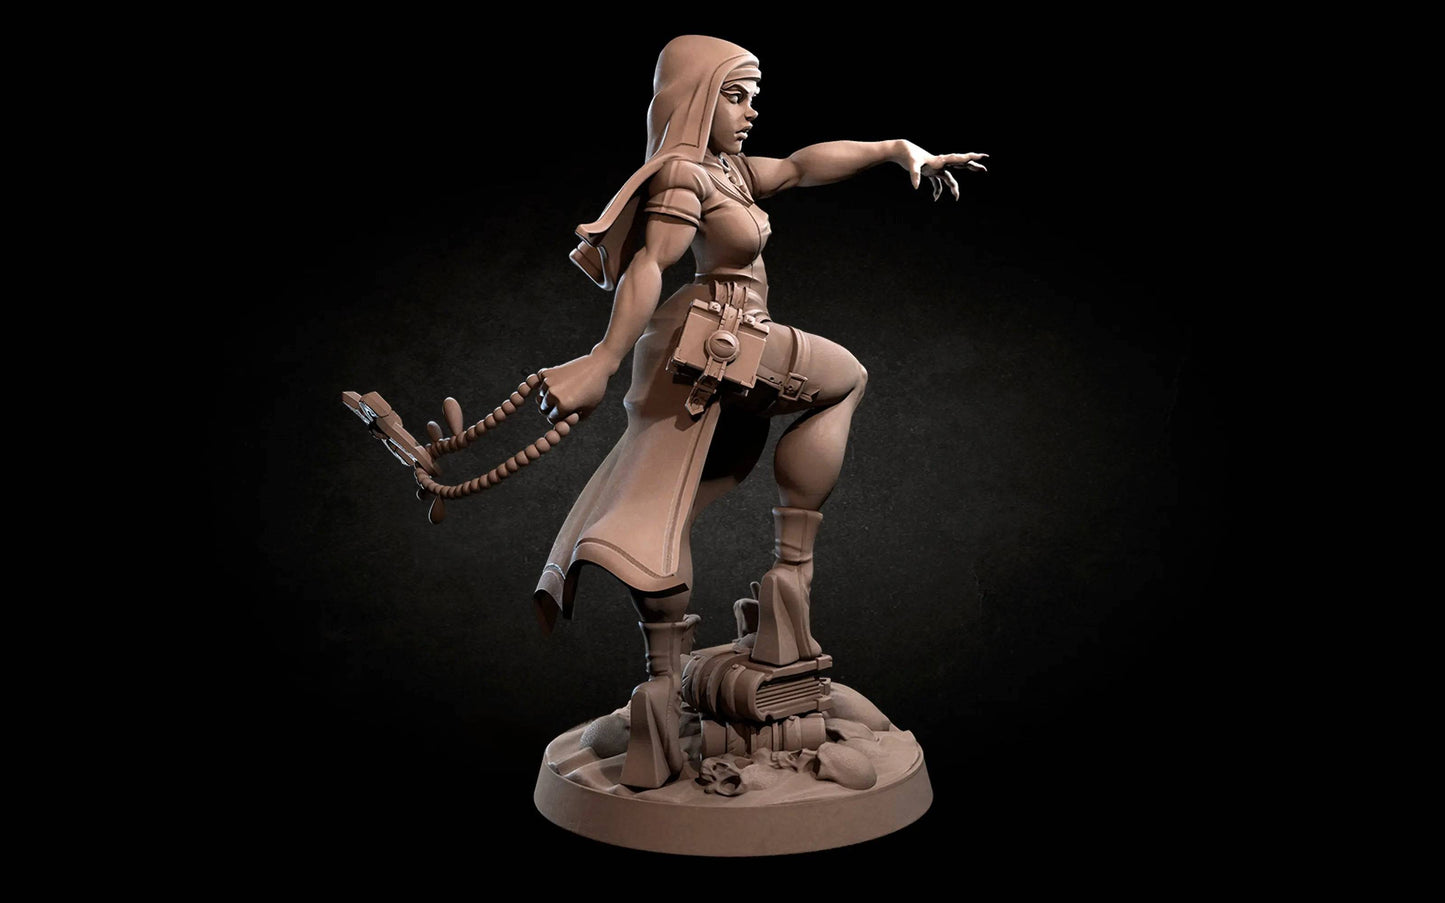 Magdalena, Pinup SFW NSFW Lovely Woman, Exorcist Rebuke | D&D Miniature Pinup | Bite the Bullet - Tattles Told 3D